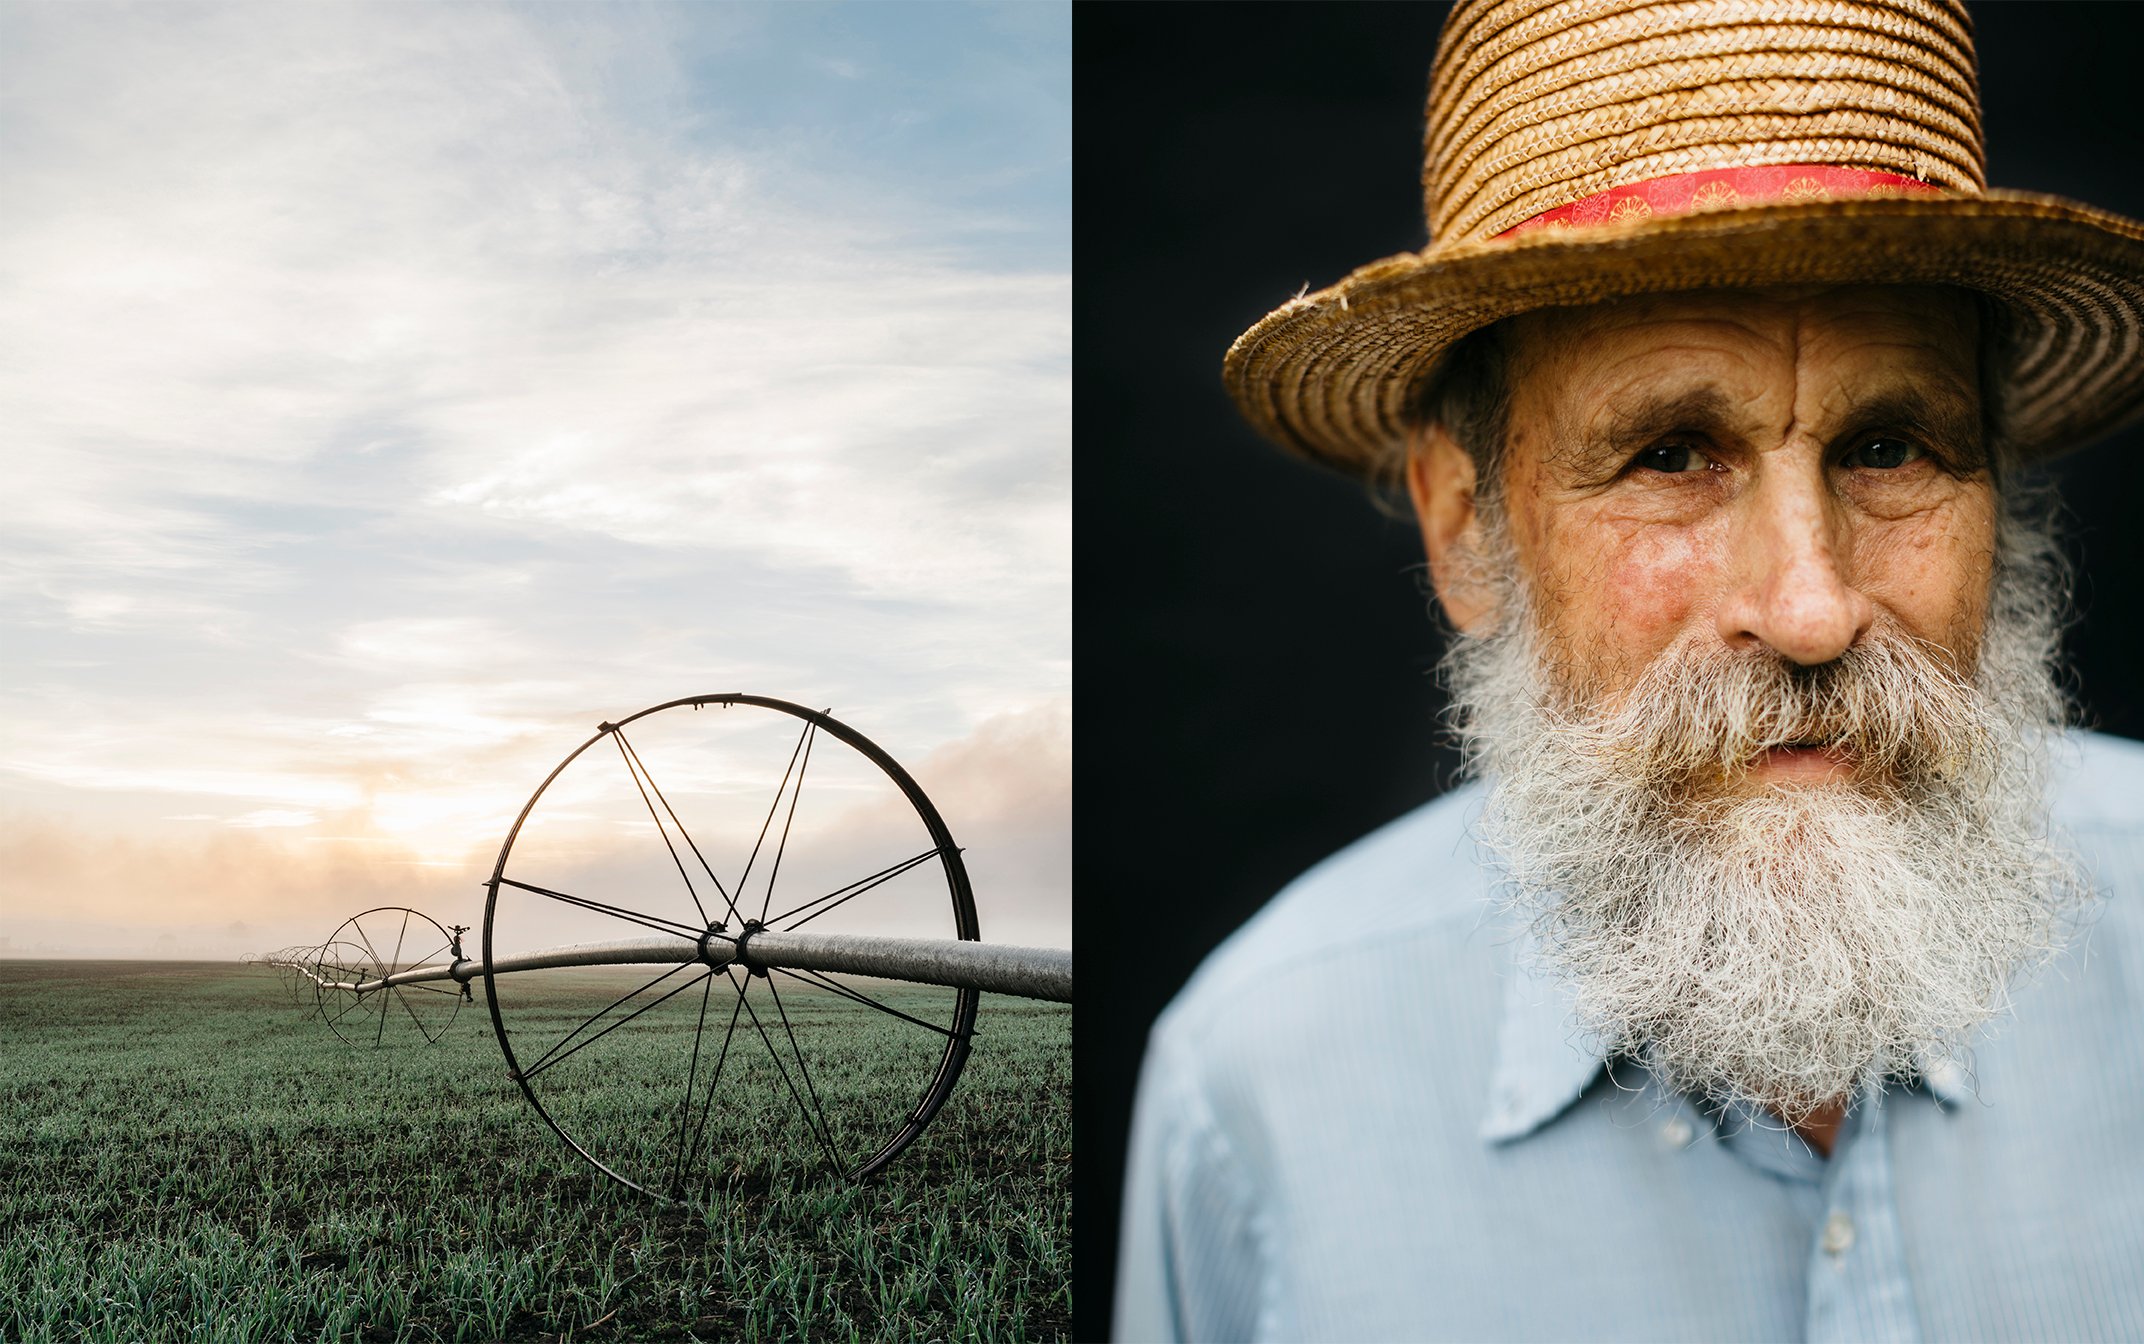 (L) shows a large field with irrigation pipeline stretching across it and (R) a portrait of a farmer by Michael Piazza